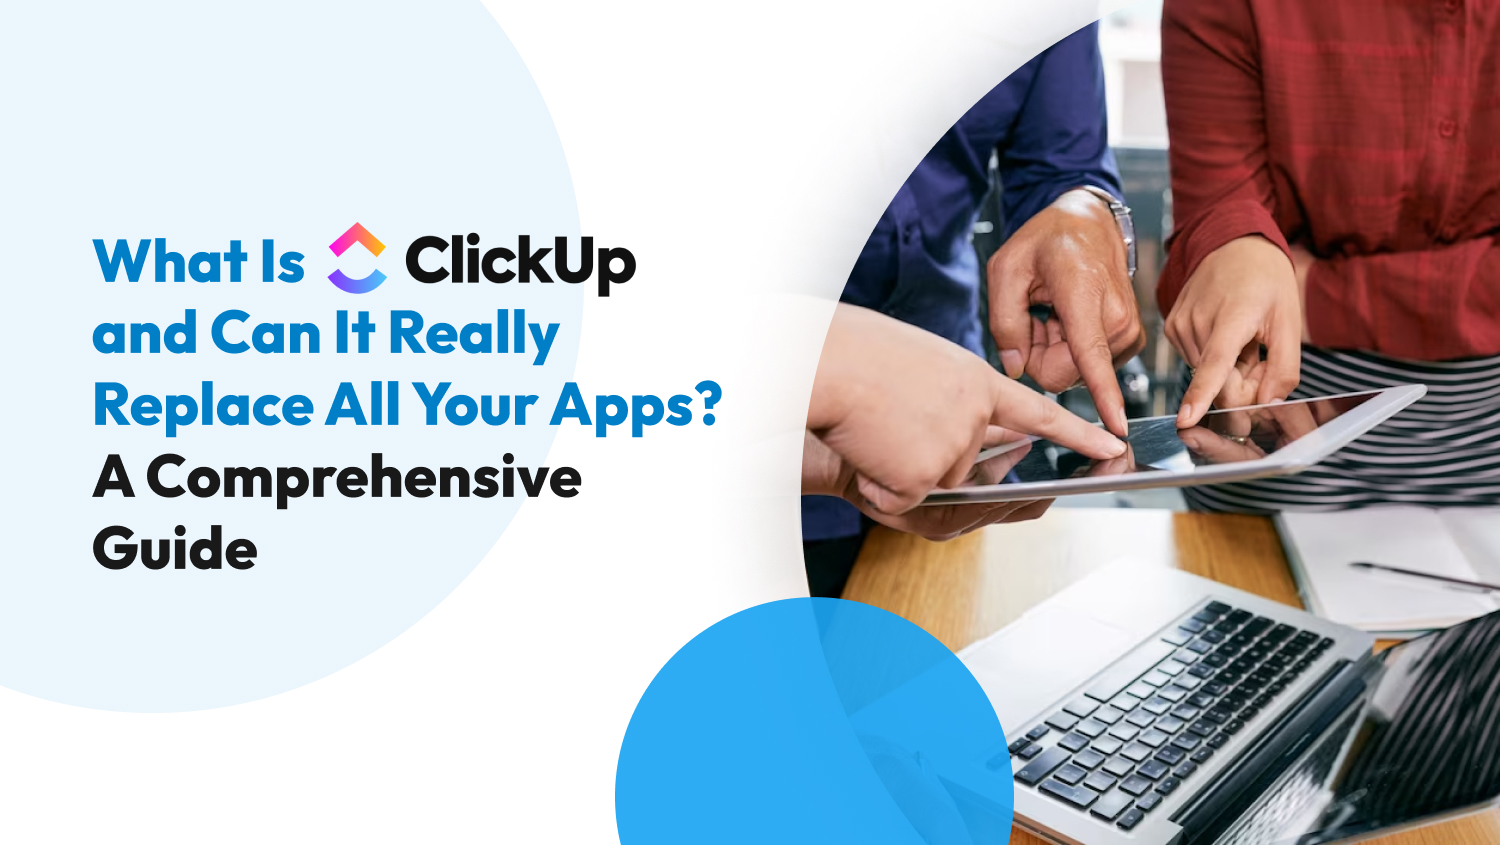 What Is ClickUp and Can It Really Replace All Your Apps? -- A Comprehensive Guide